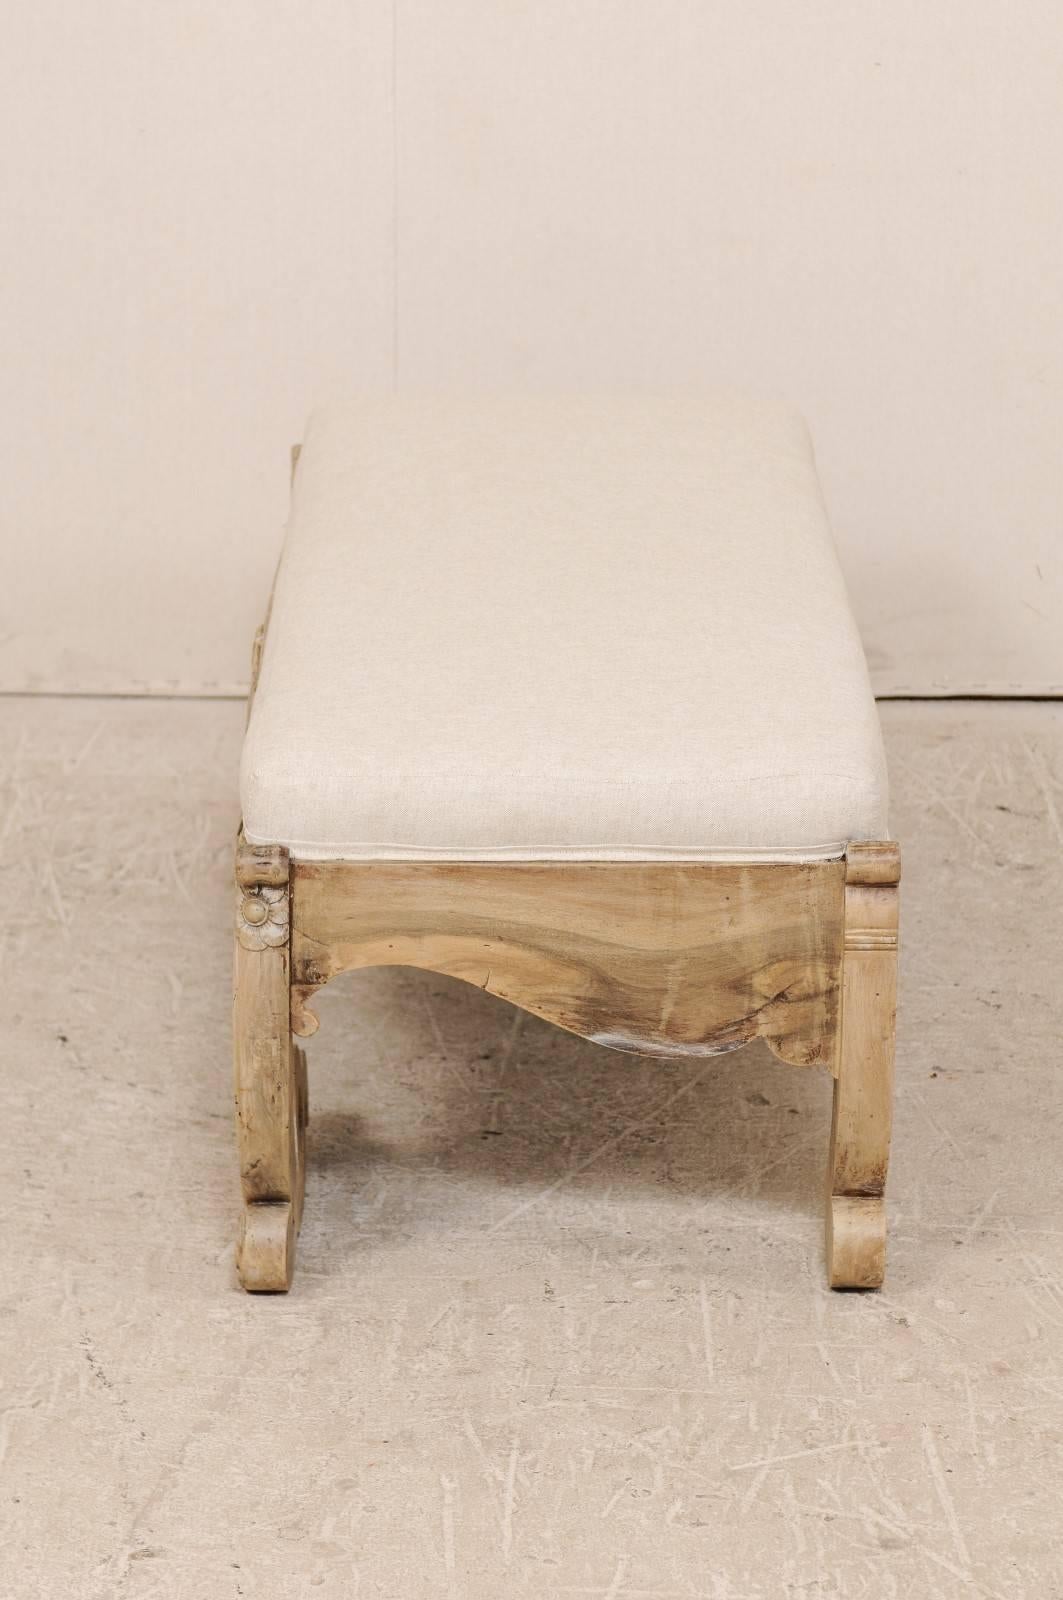 Swedish, Early 20th Century Light Colored Wood Bench with Unique Legs 1